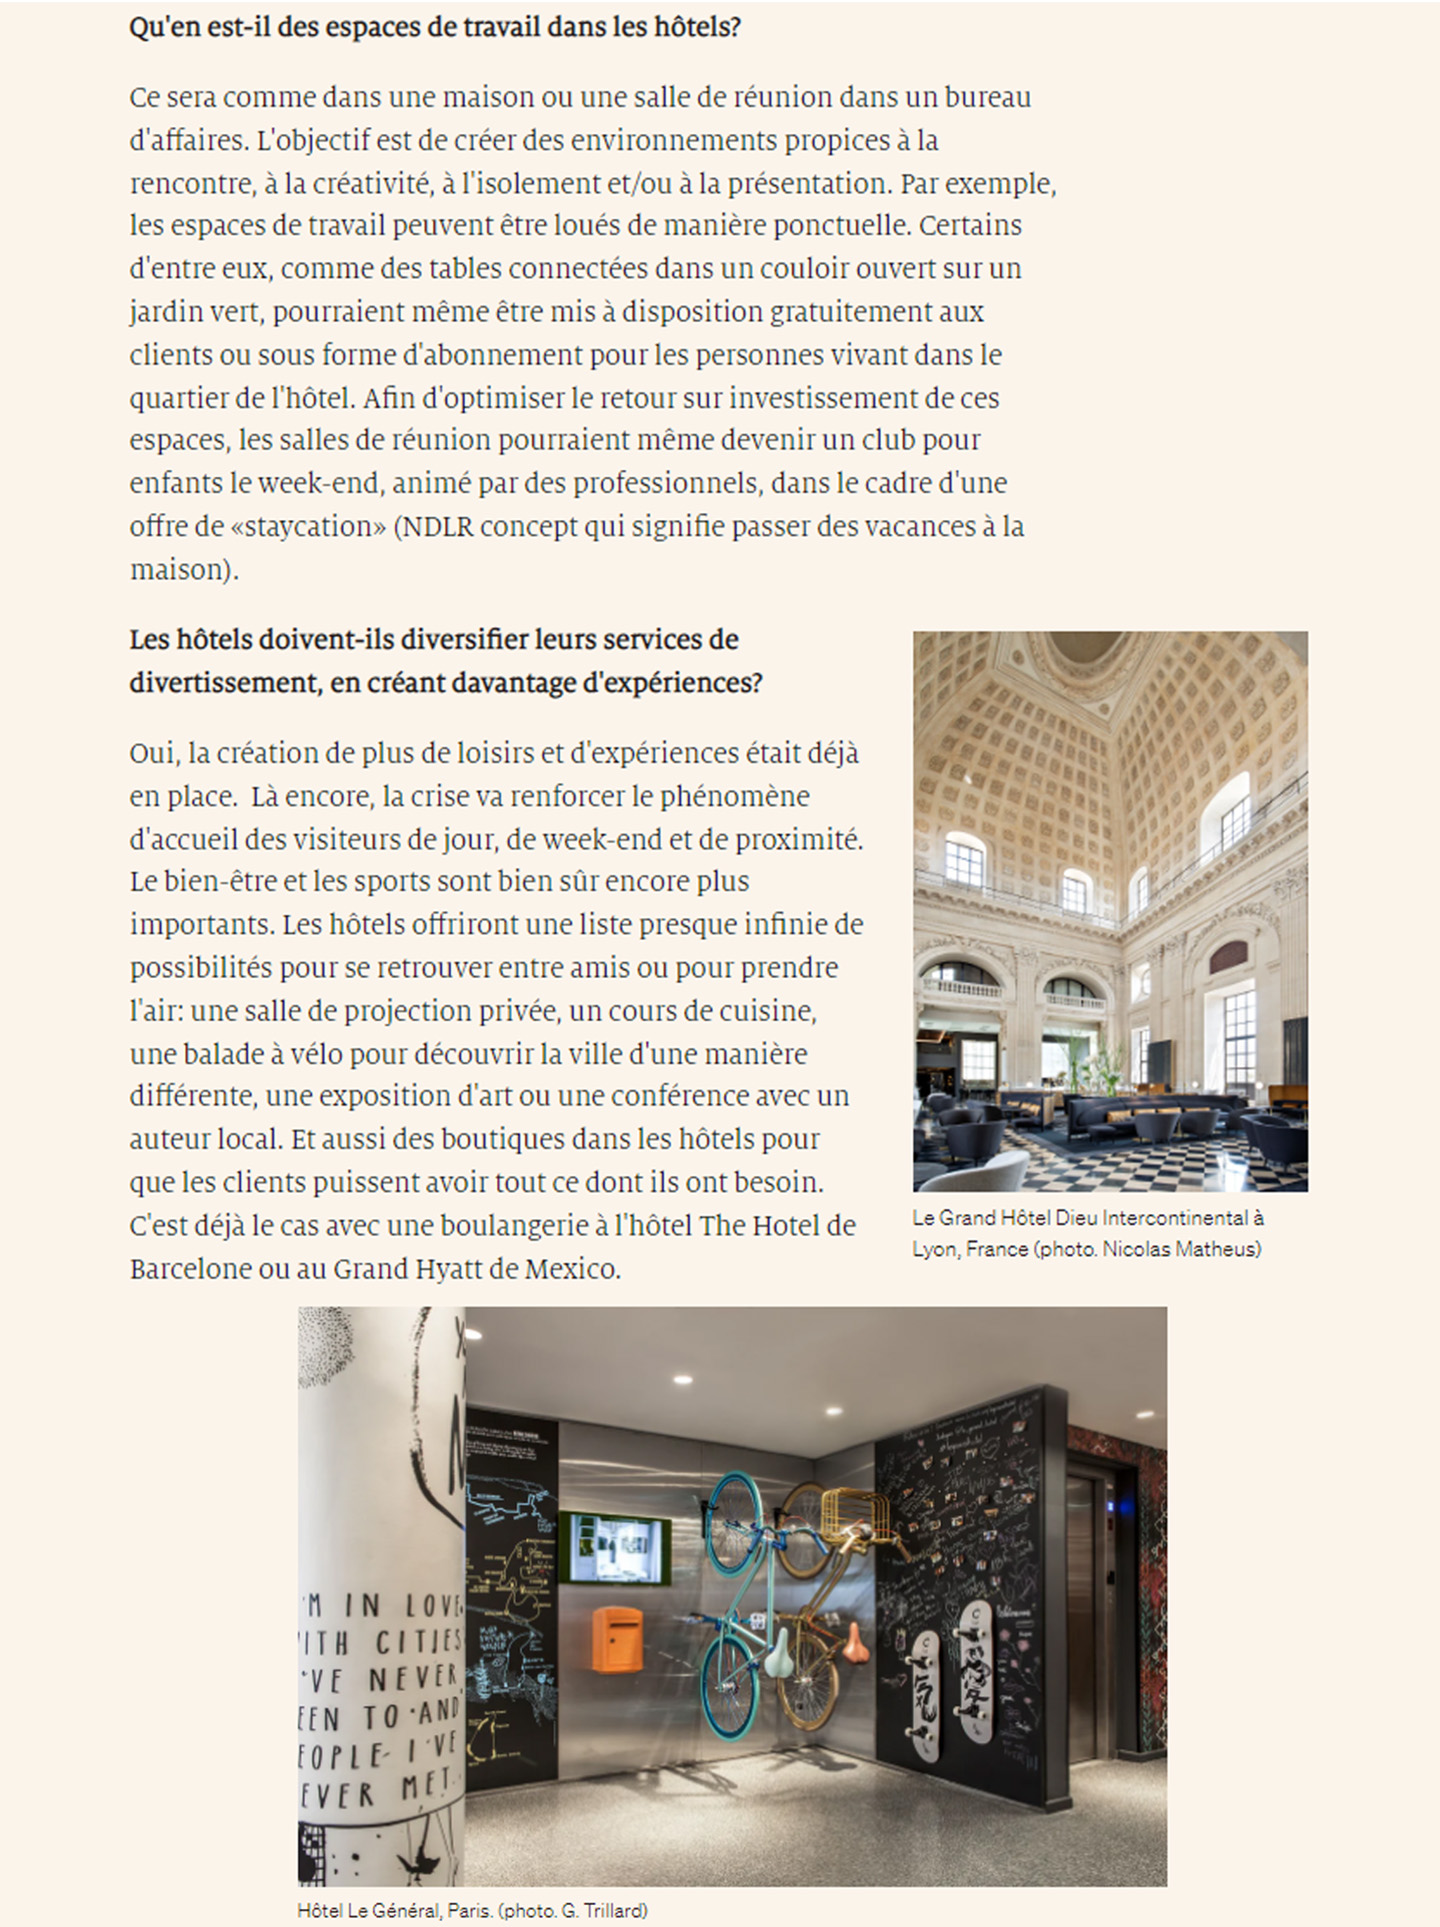 Article in Luxury tribune about jean-philippe nuel studio and the future of the hotel industry, interior design in the luxury hotel industry